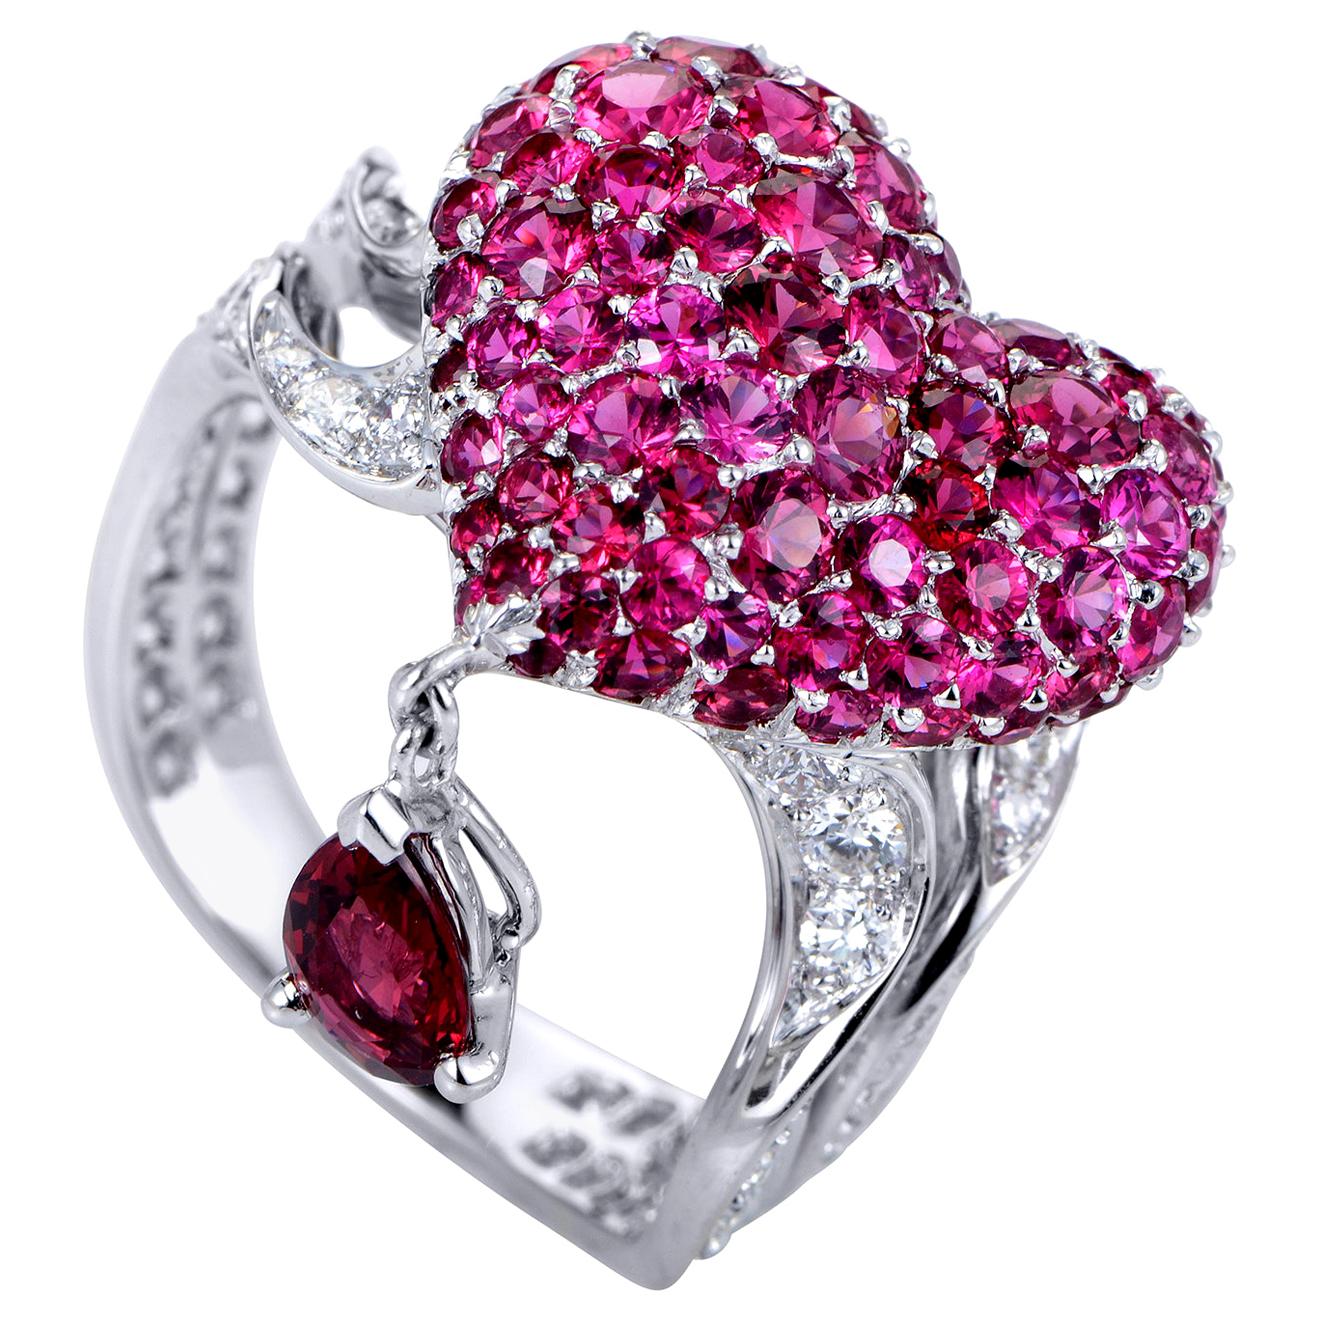 Dior Cupidon Diamonds, Rubies and Red Spinel White Gold Arrow and Heart Ring